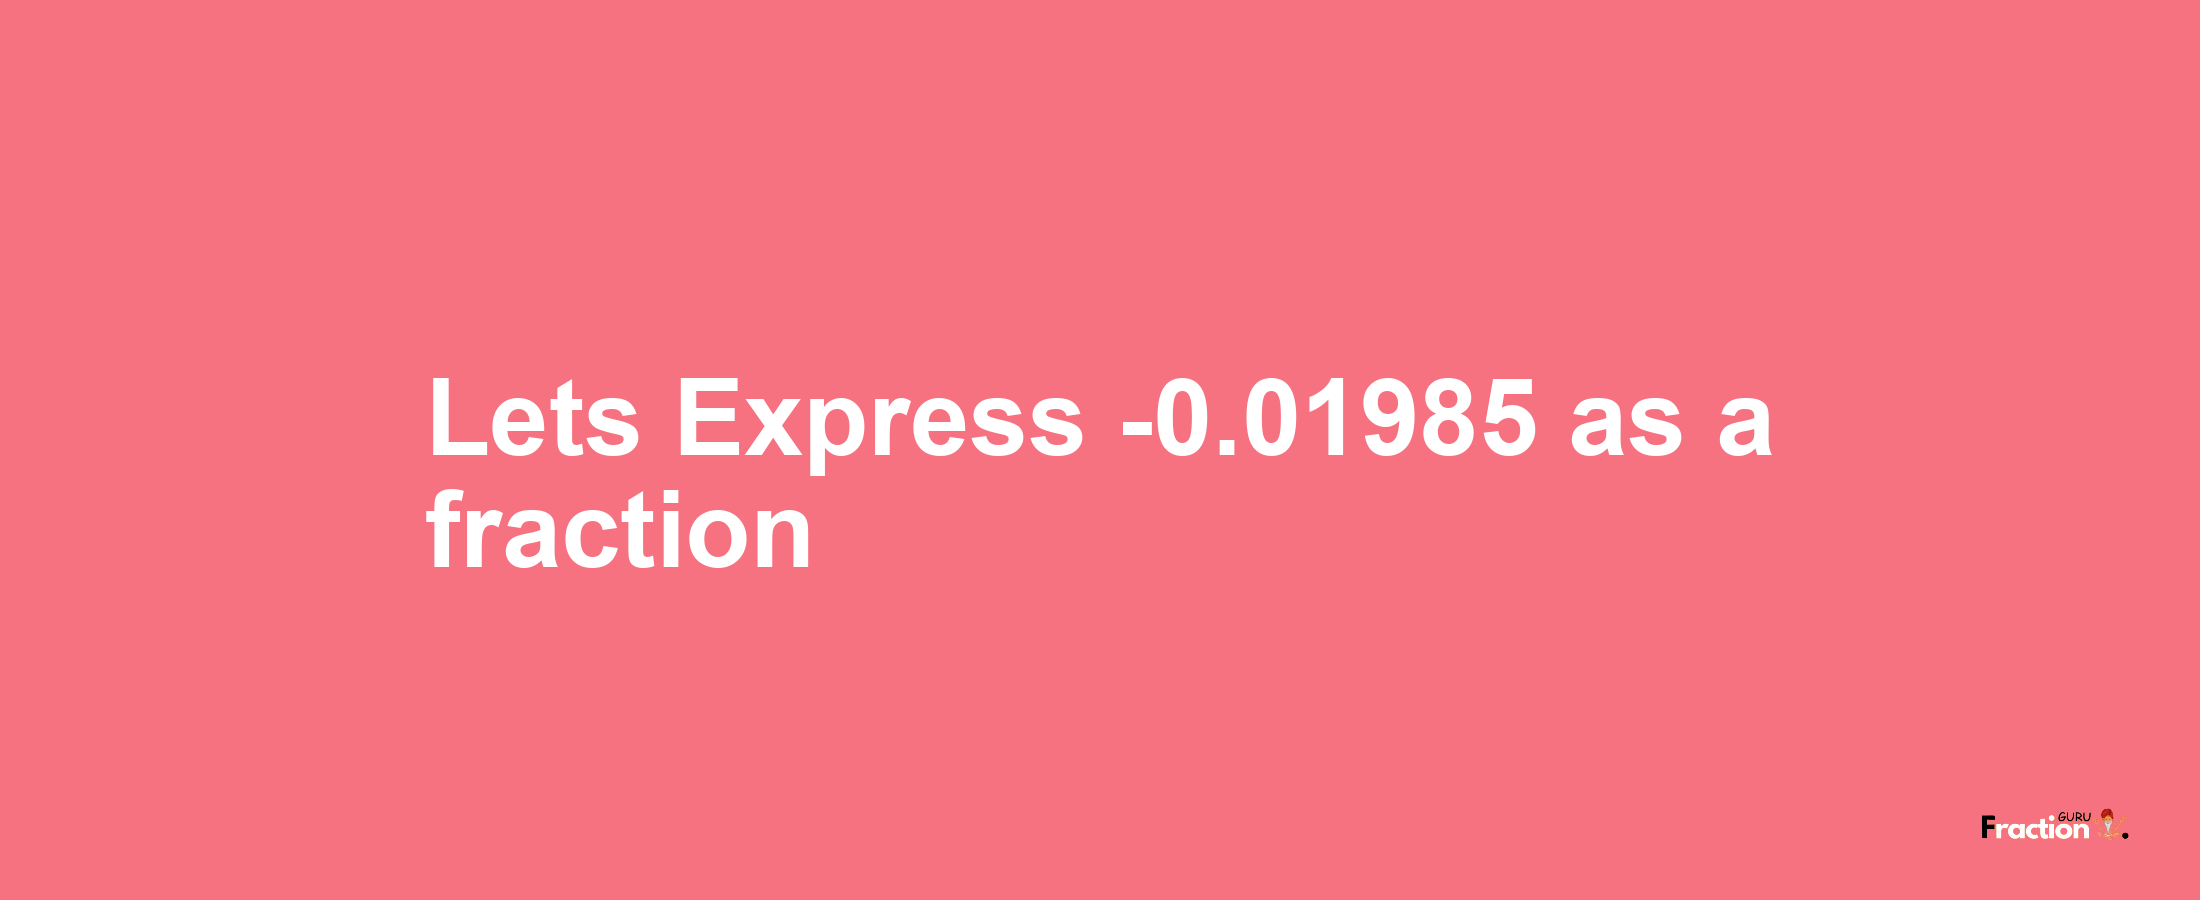 Lets Express -0.01985 as afraction